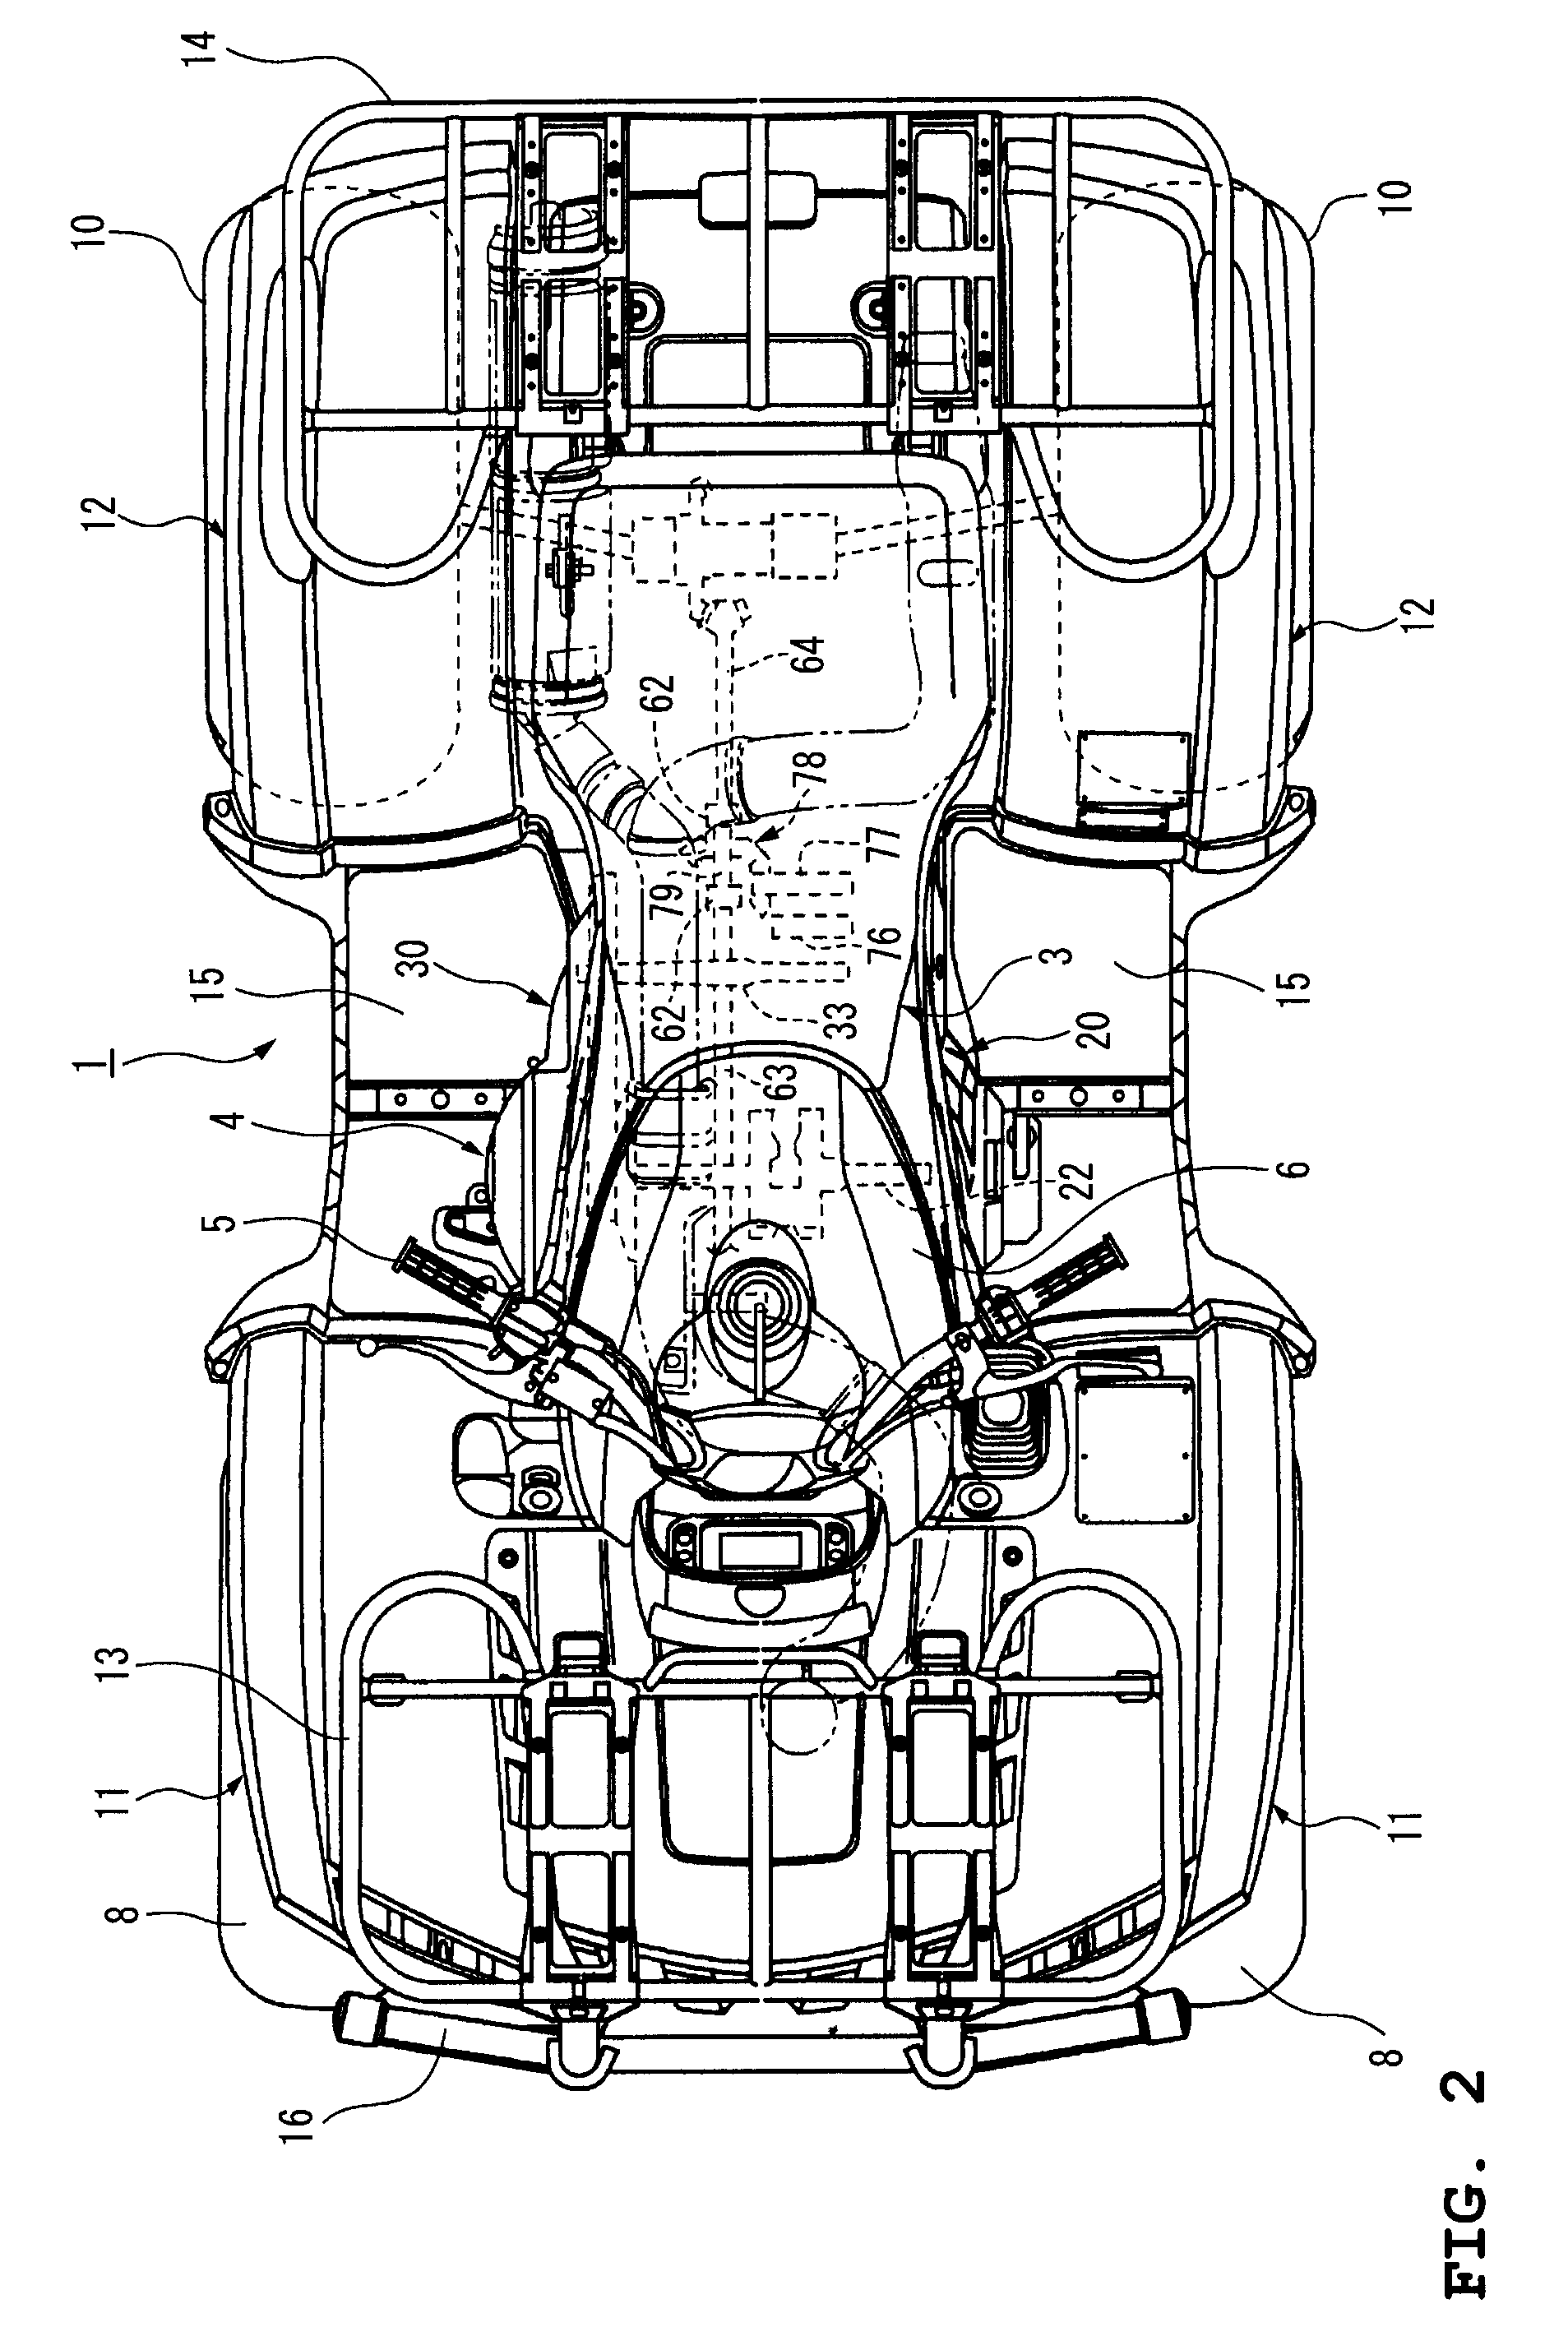 V-belt continuously variable transmission and straddle-type vehicle